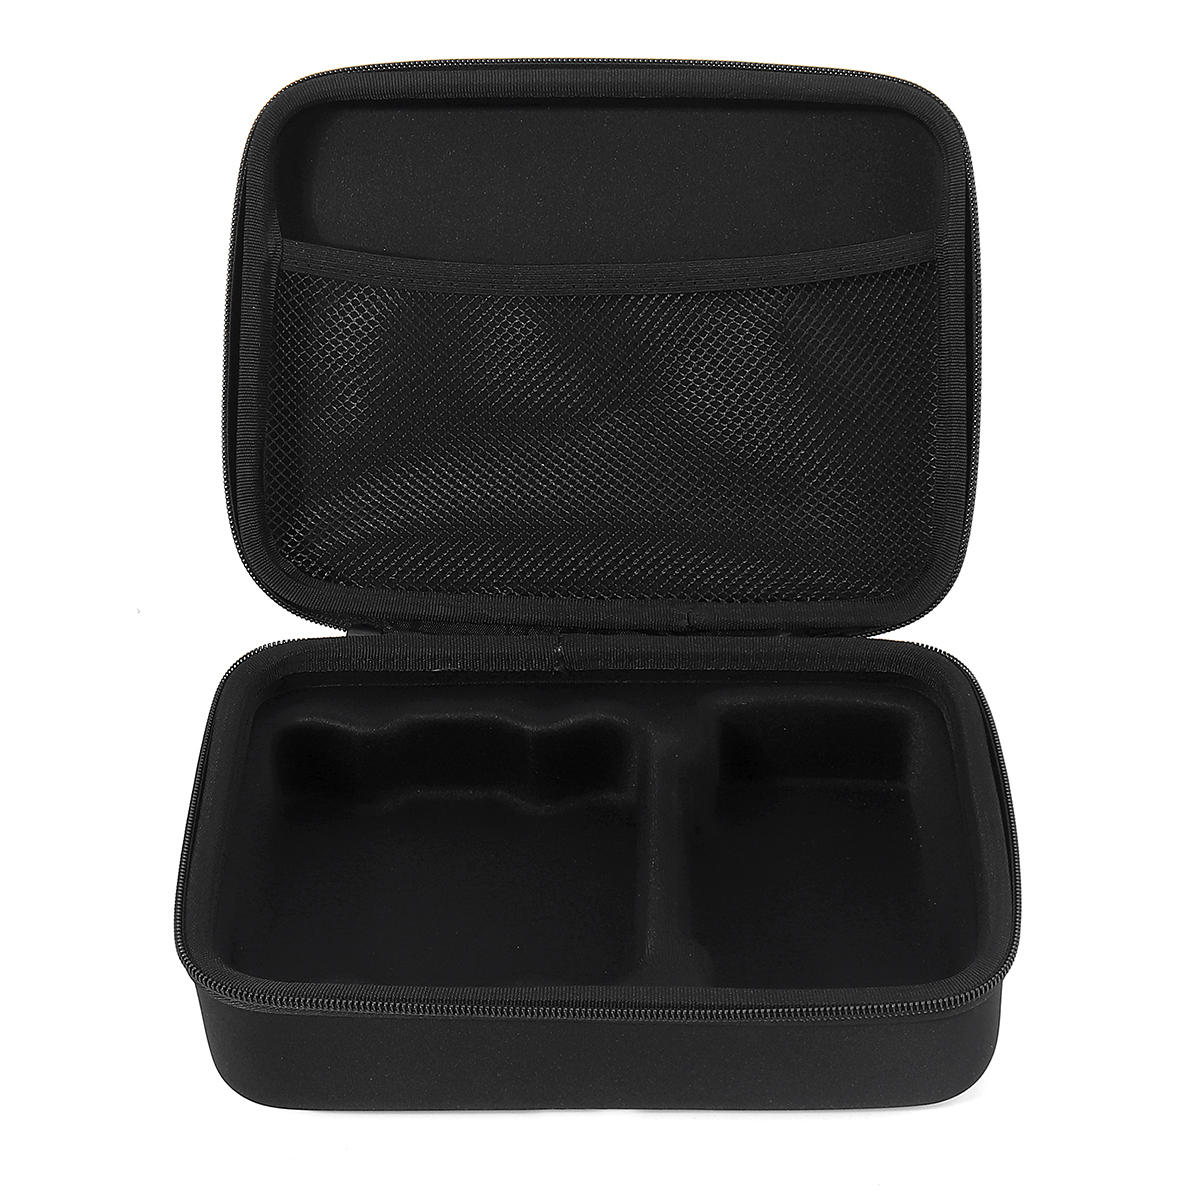 Portable Handheld Hard Bag Storage Carry Case For H1 Drone Aircraft Remote Control Carrying Case For Travel Outdoor